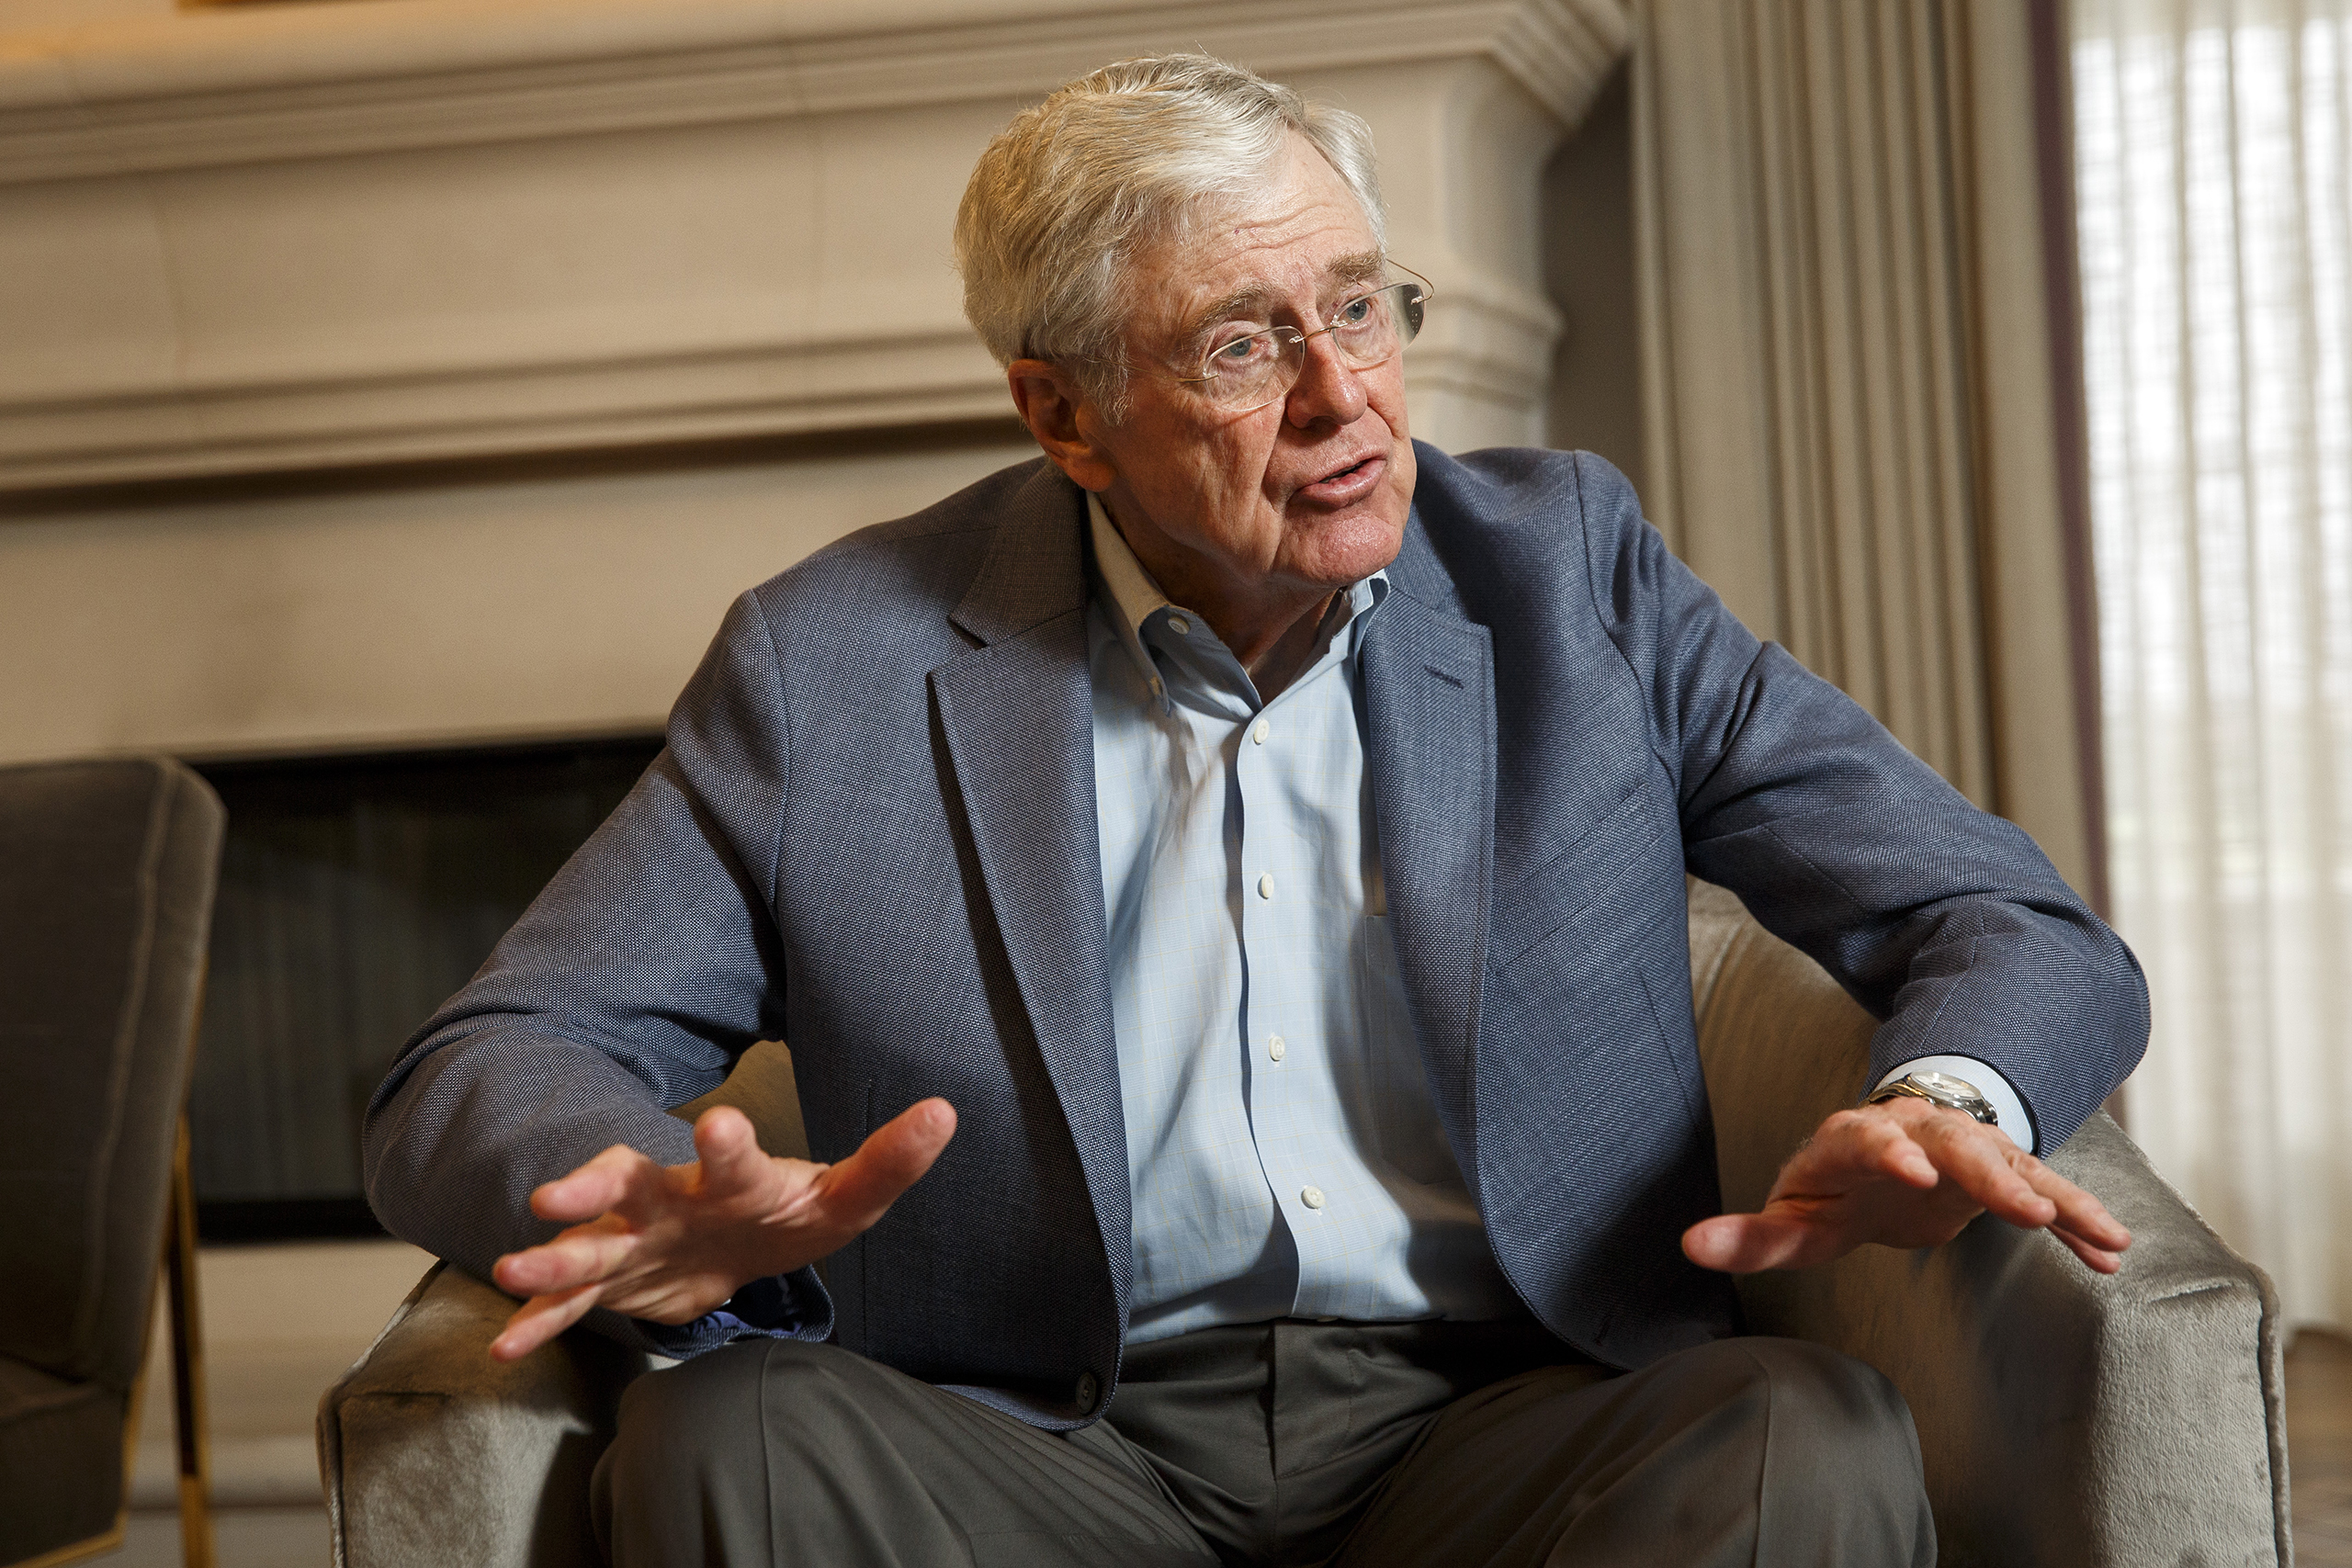 Charles Koch speaks during an interview with the Washington Post at the Freedom Partners Summit in Dana Point, Calif., on Aug. 3, 2015. (Patrick T. Fallon—The Washington Post/Getty Images)